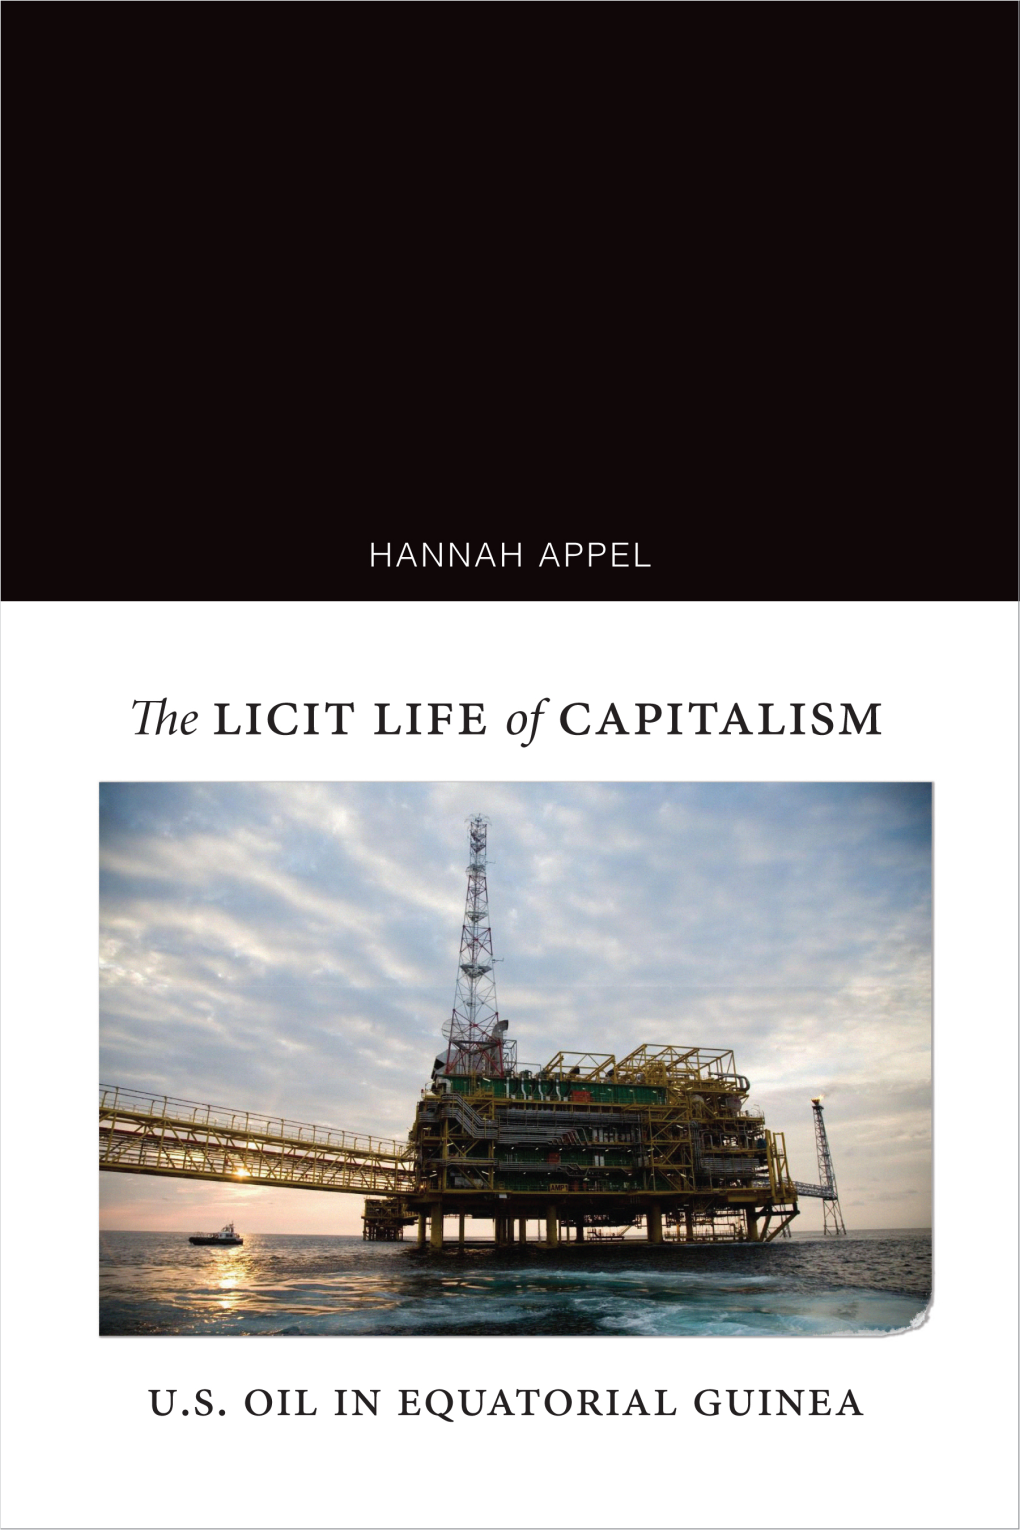 The Licit Life of Capitalism This Page Intentionally Left Blank HANNAH APPEL